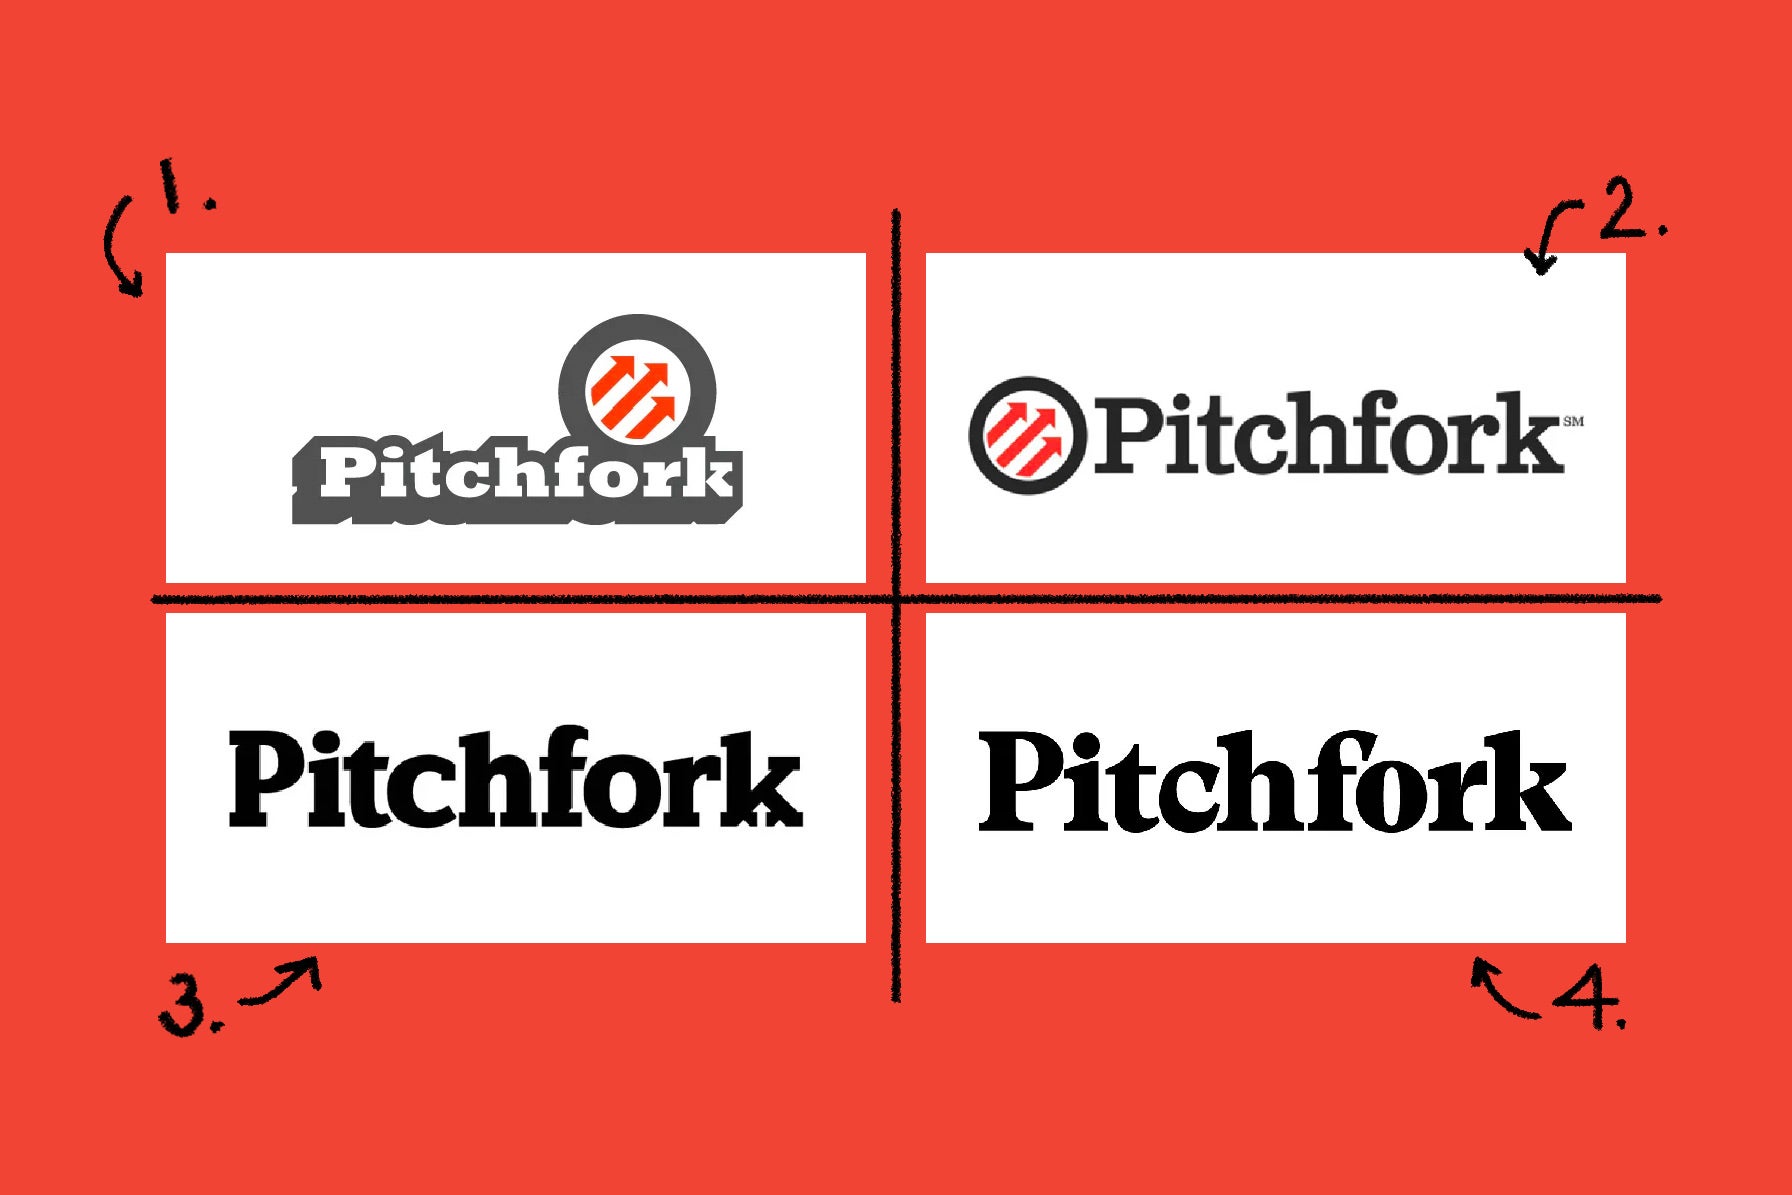 Four iterations of the Pitchfork logo over the years.